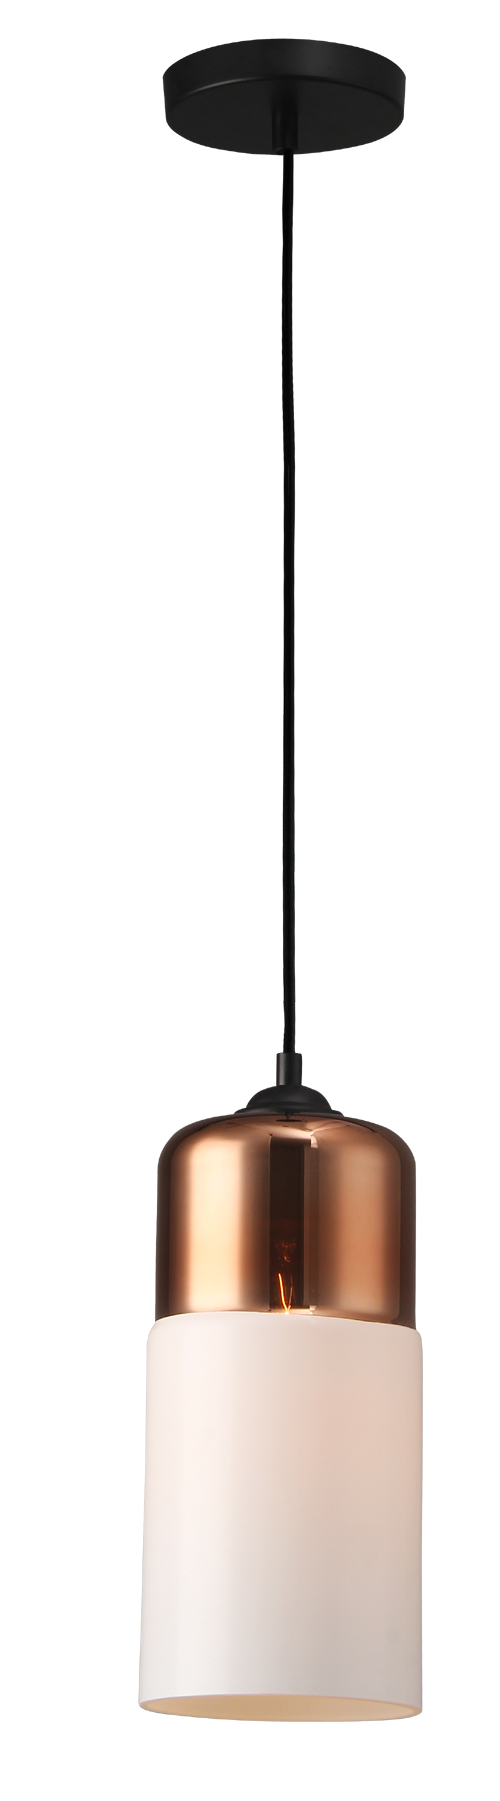 P1015CW E27 pendant light Copper and White Glass design Vintage Modern hanging lamp